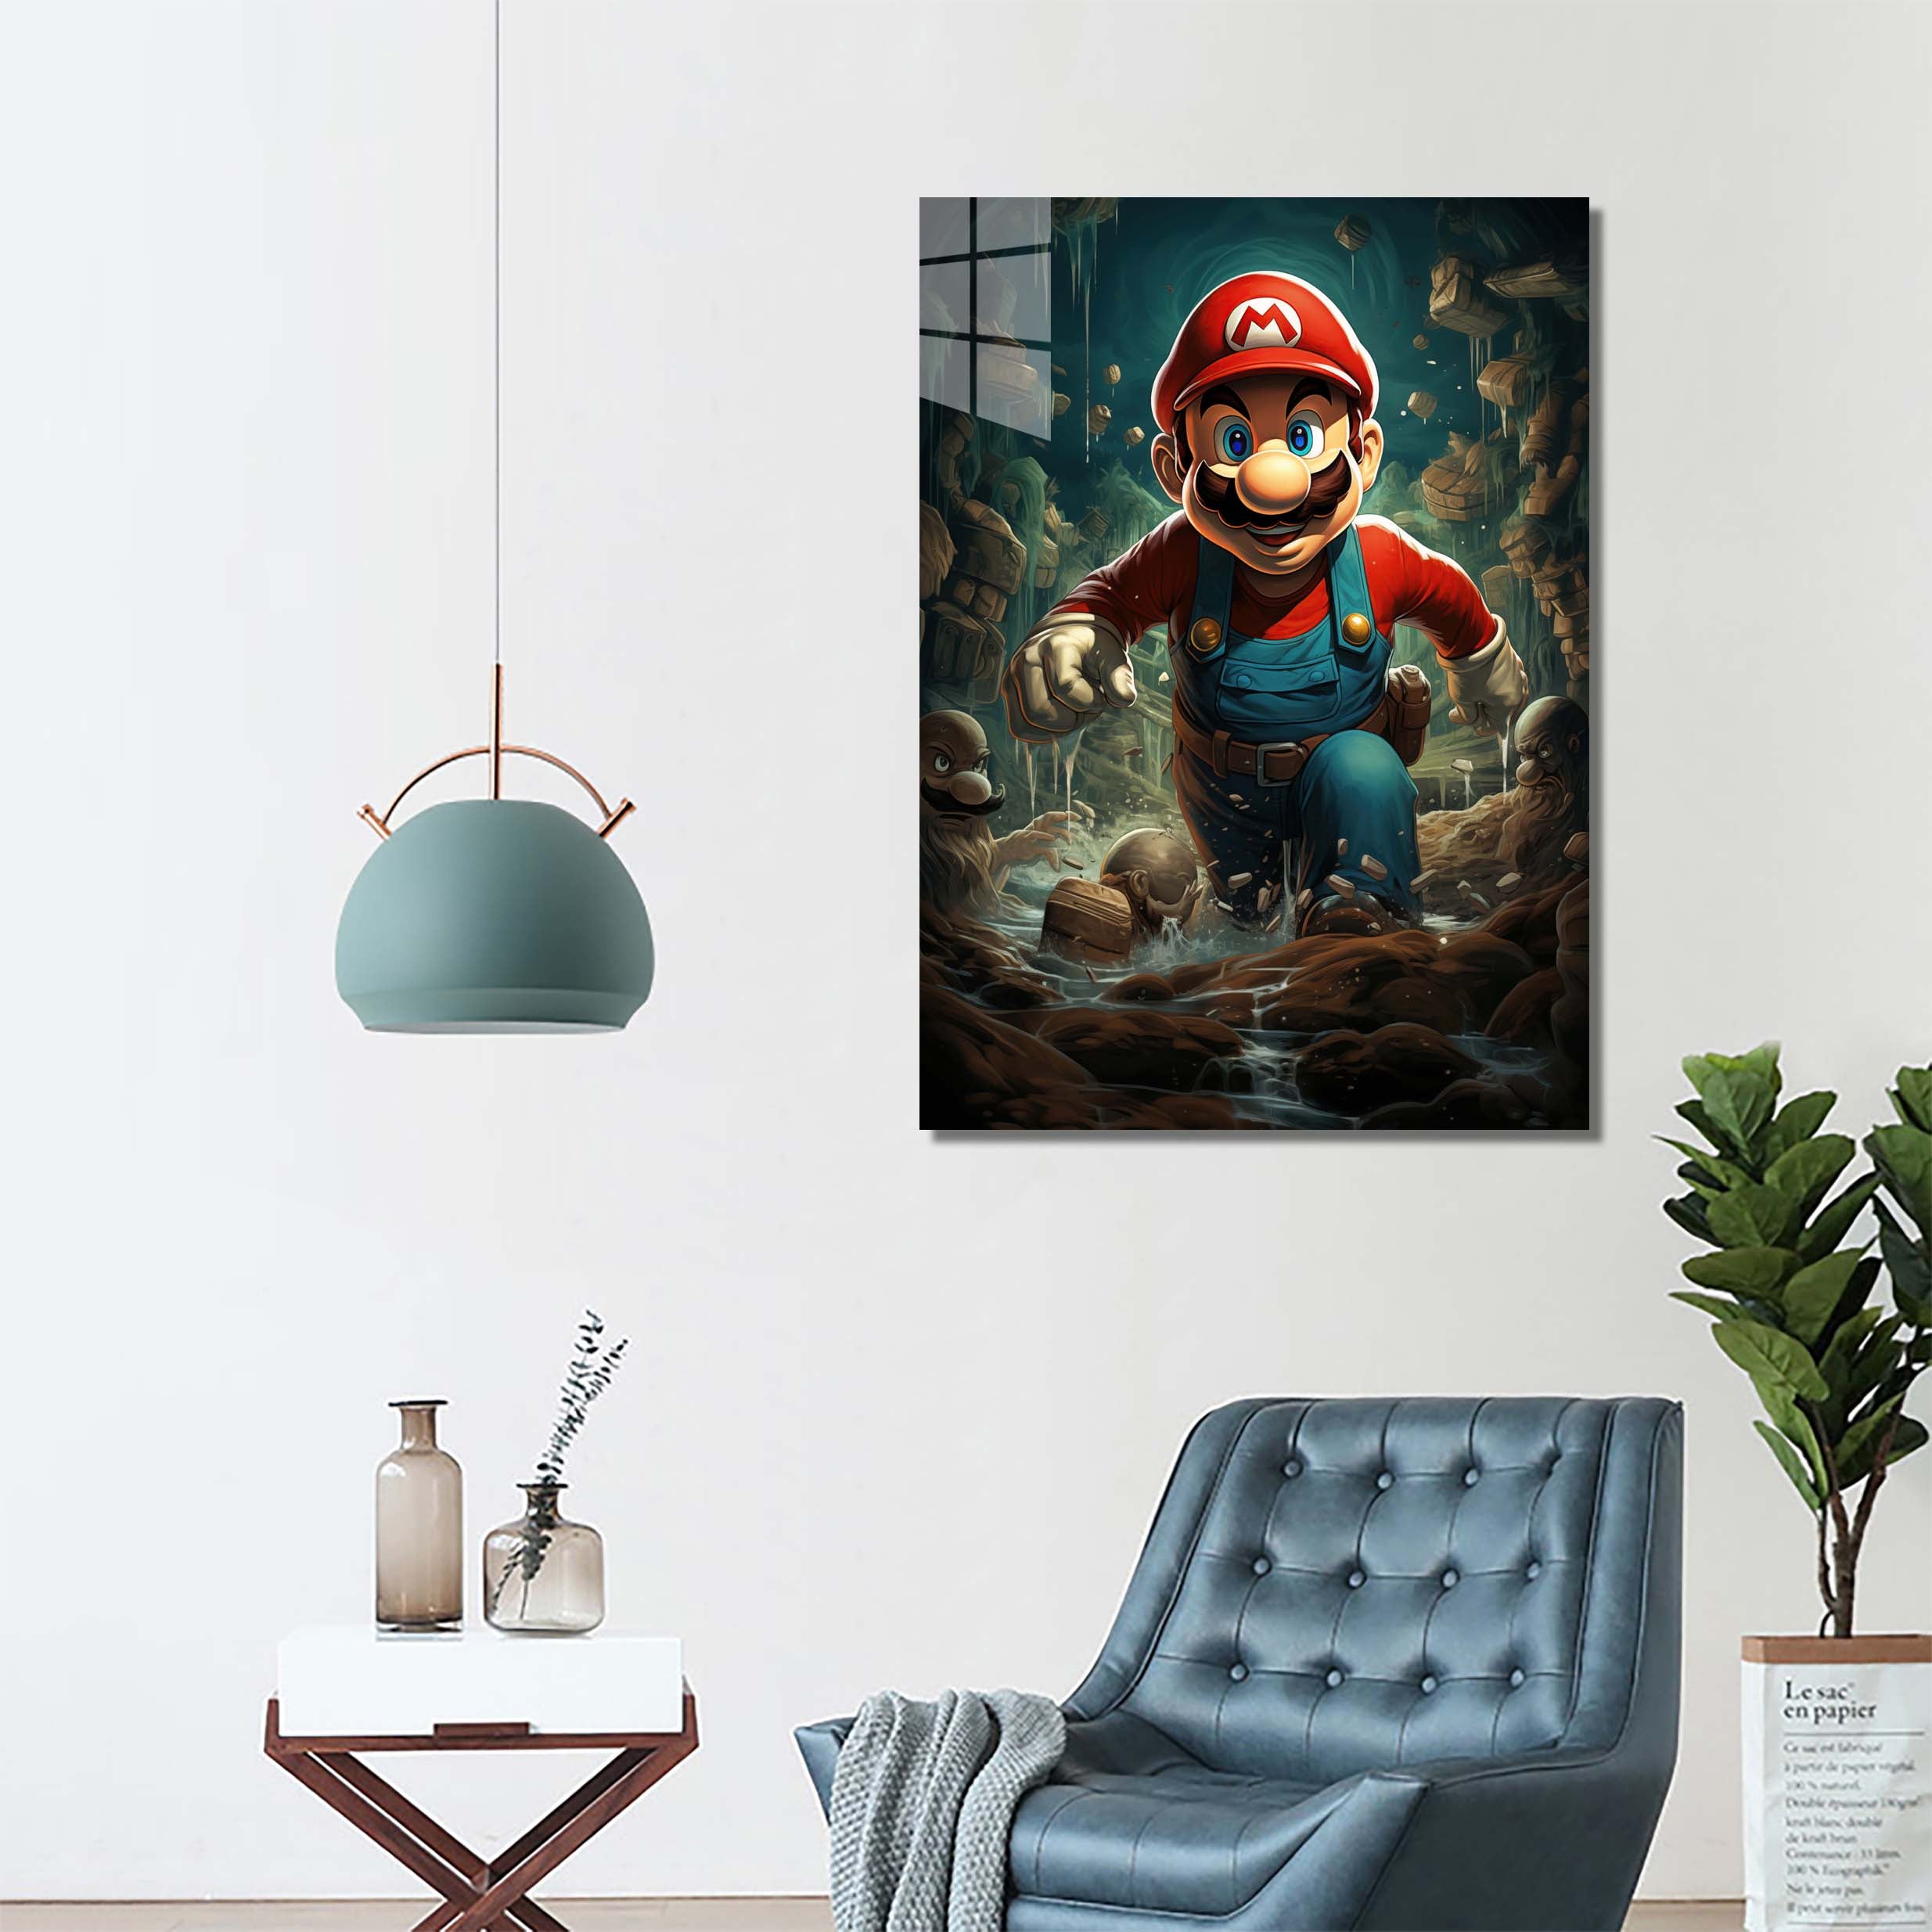 Mario under the Town-designed by @SAMCRO